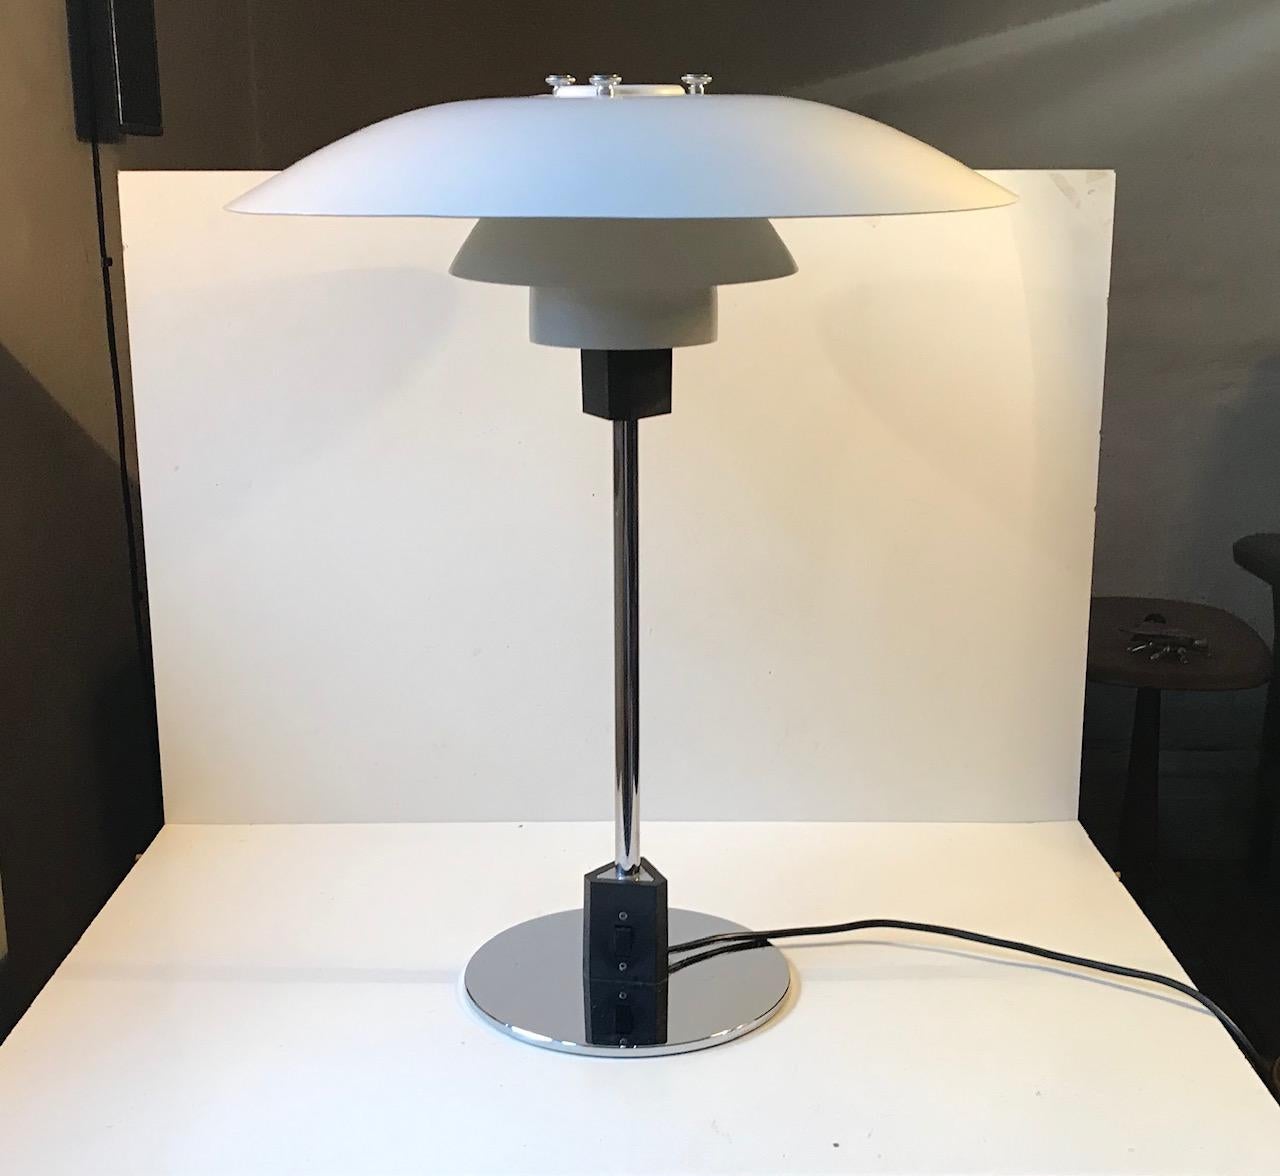 PH 4/3 table or desk lamp designed by Poul Henningsen for Louis Poulsen in Denmark in 1964. This particular light it’s with matté white shades dates from the 1970s. It has the old Louis Poulsen paper label with serial number and specifications to